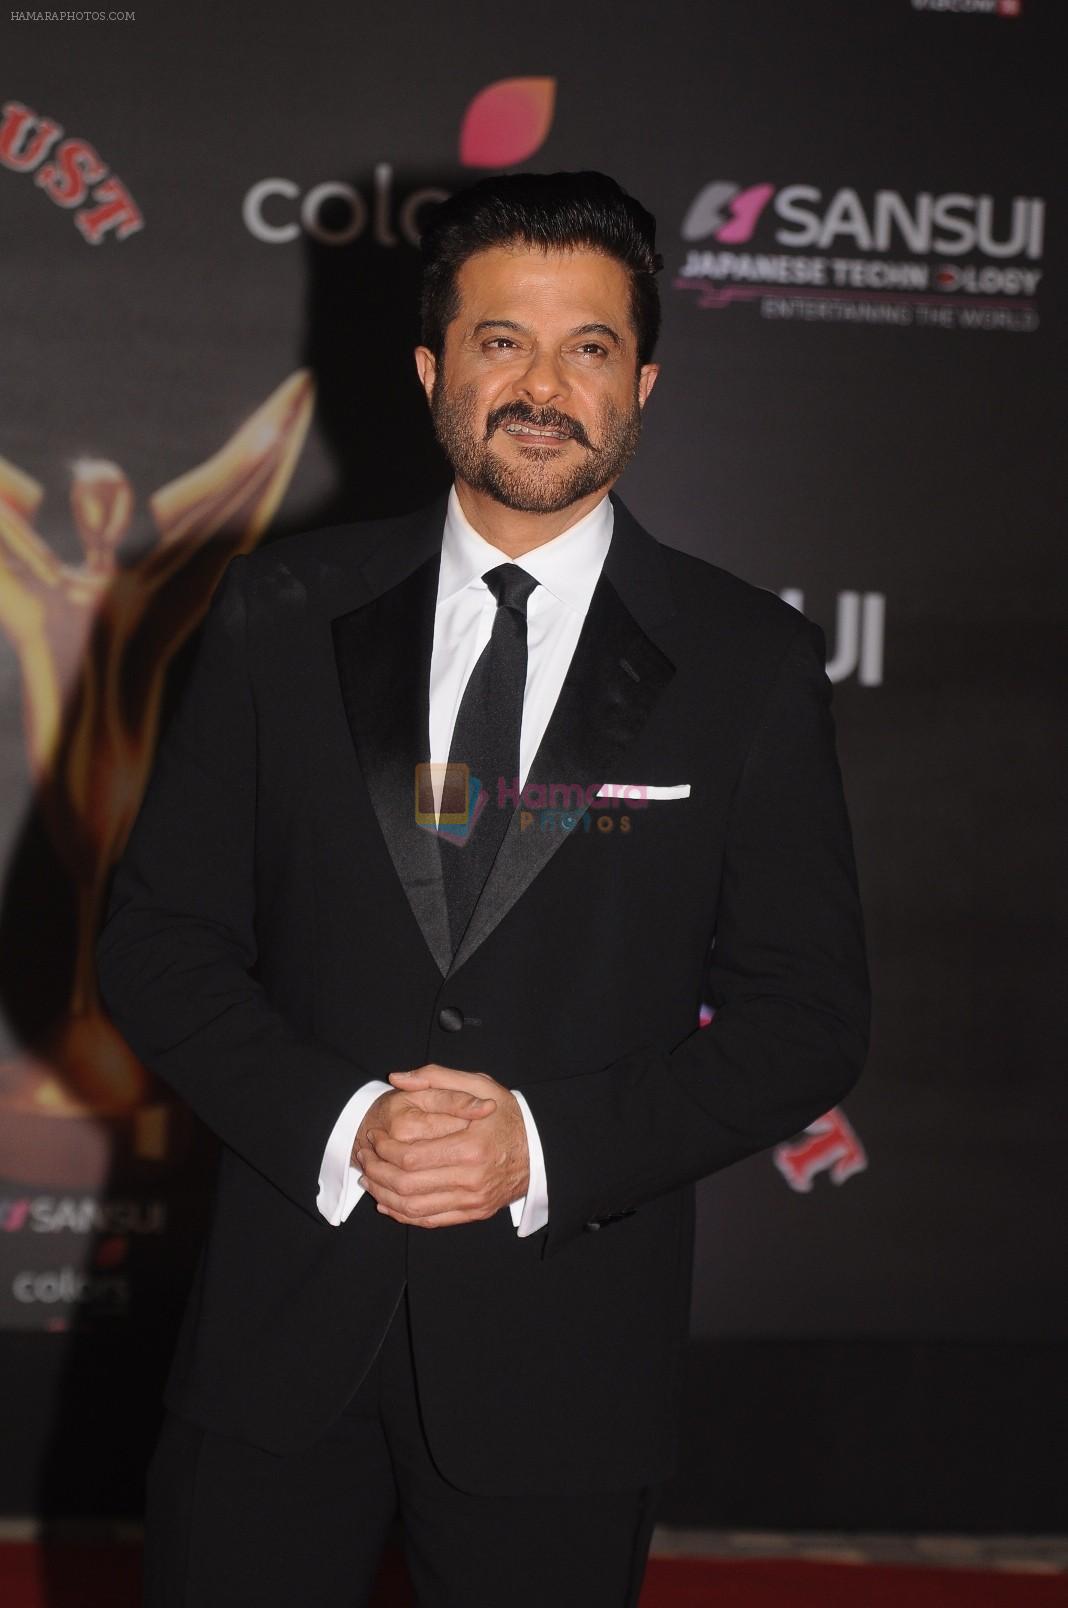 Anil Kapoor at Sansui COLORS Stardust Awards